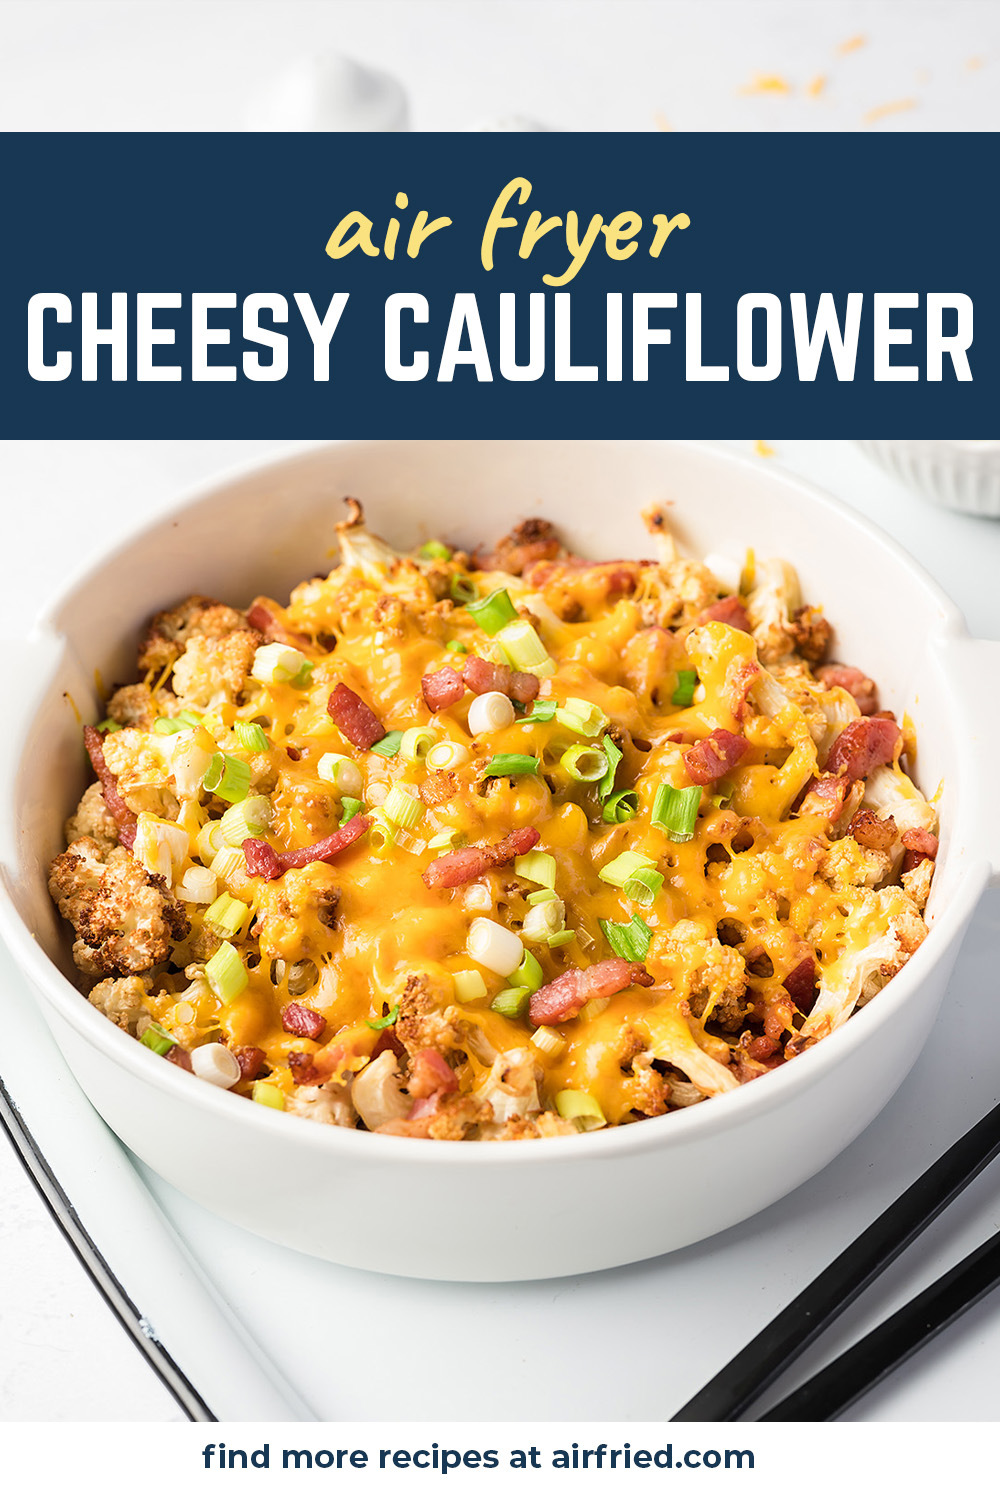 This air fried cauliflower recipe is lightly seasoned and loaded with bacon, cheese, and green onions.  So good!